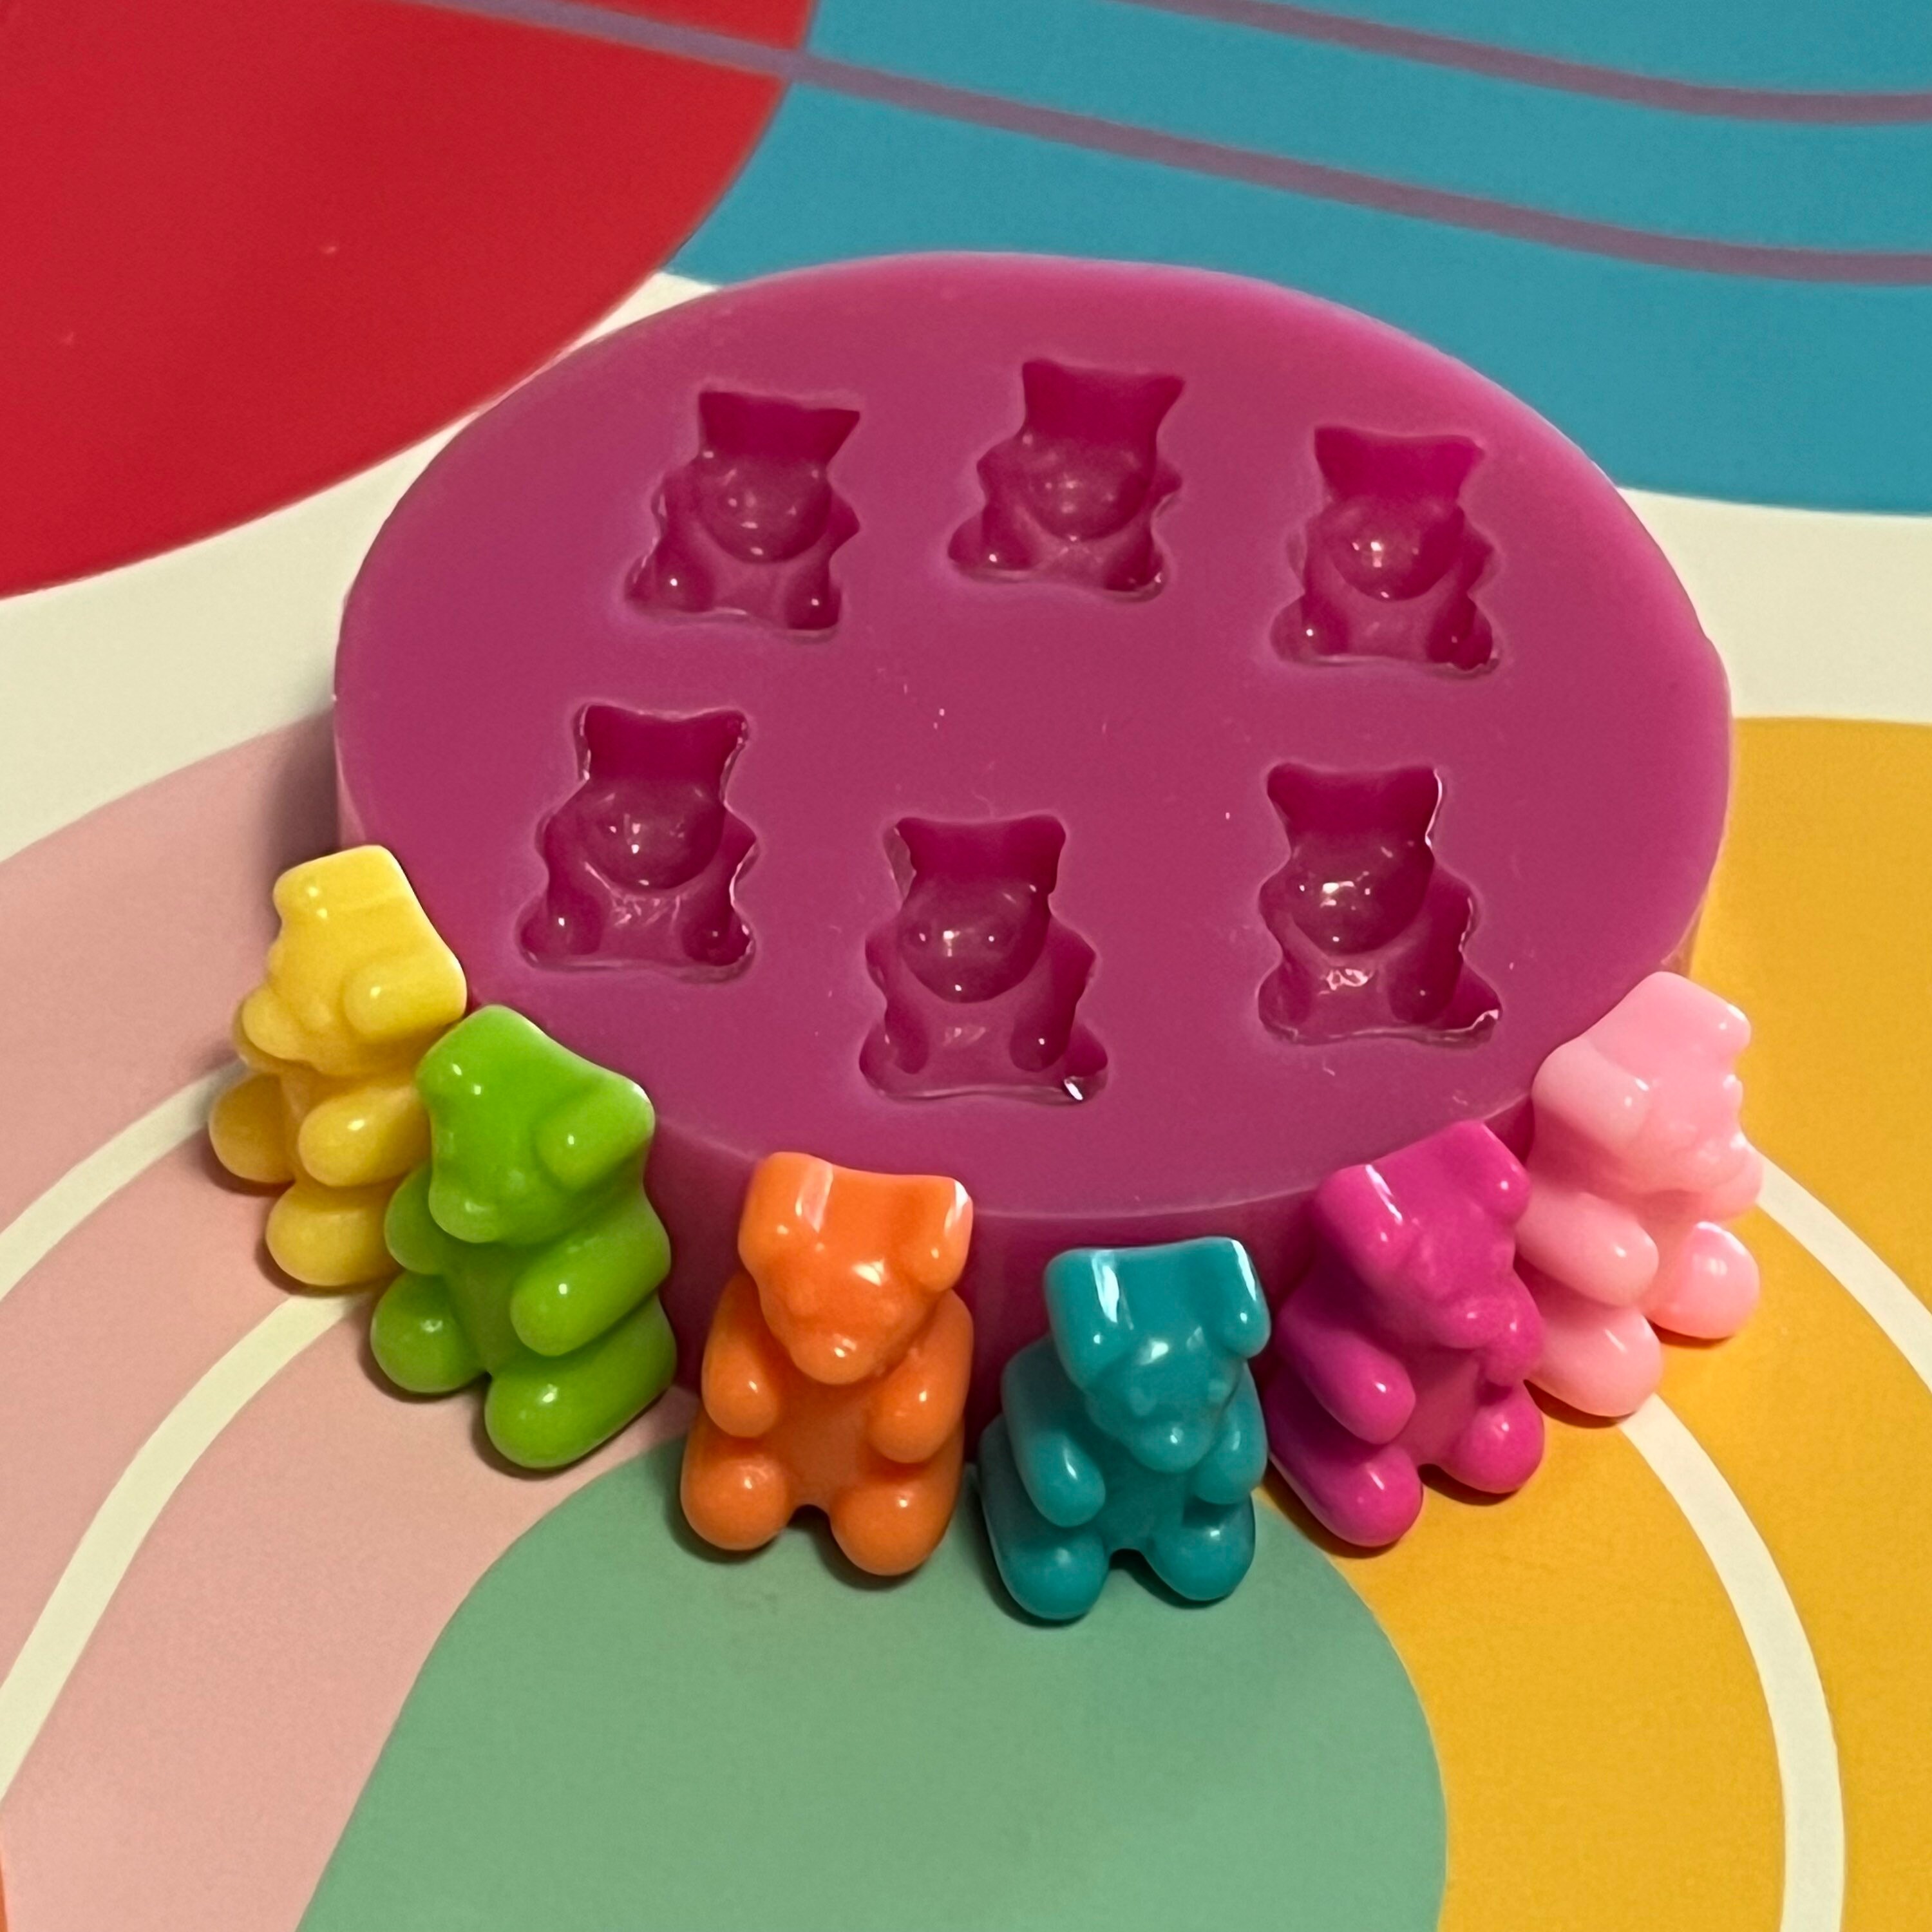 50 Cavity Gummy Bear Silicone Mold, Pink Silicone, Resin Mold , Lolly Mold,  Chocolate Mold, DIY Jewelry Molds, Resin Mould. 